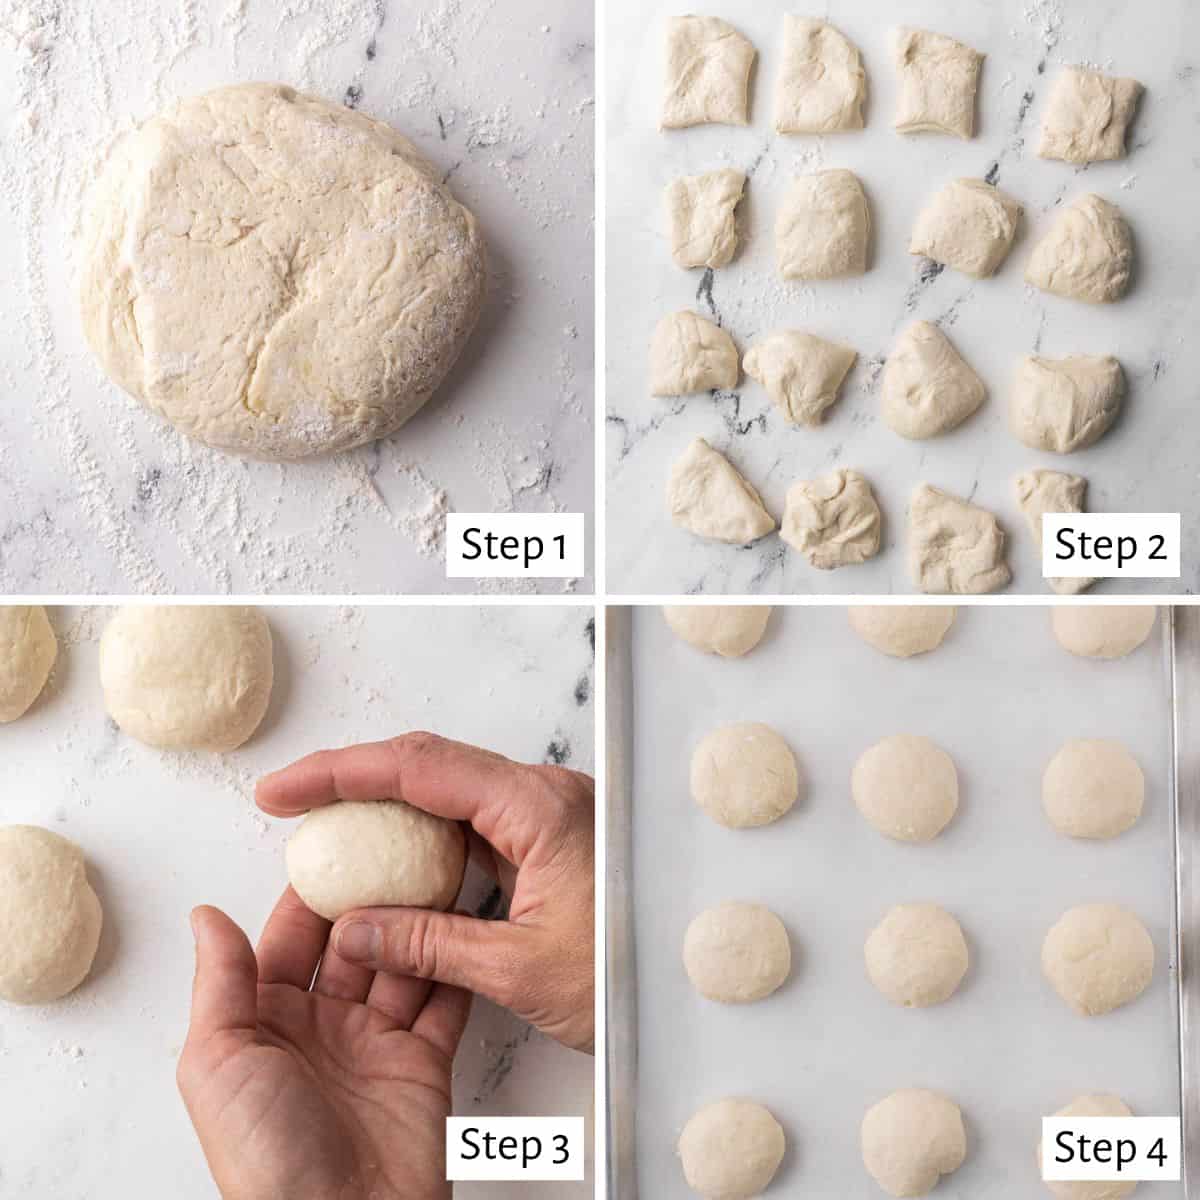 4 image collage making recipe: 1-deflated dough on a floured surface, 2-dough divided into 16 pieces, 3- hand rolling pieces into a ball, 4- dough balls on a parchment-lined sheet pan before second rise.